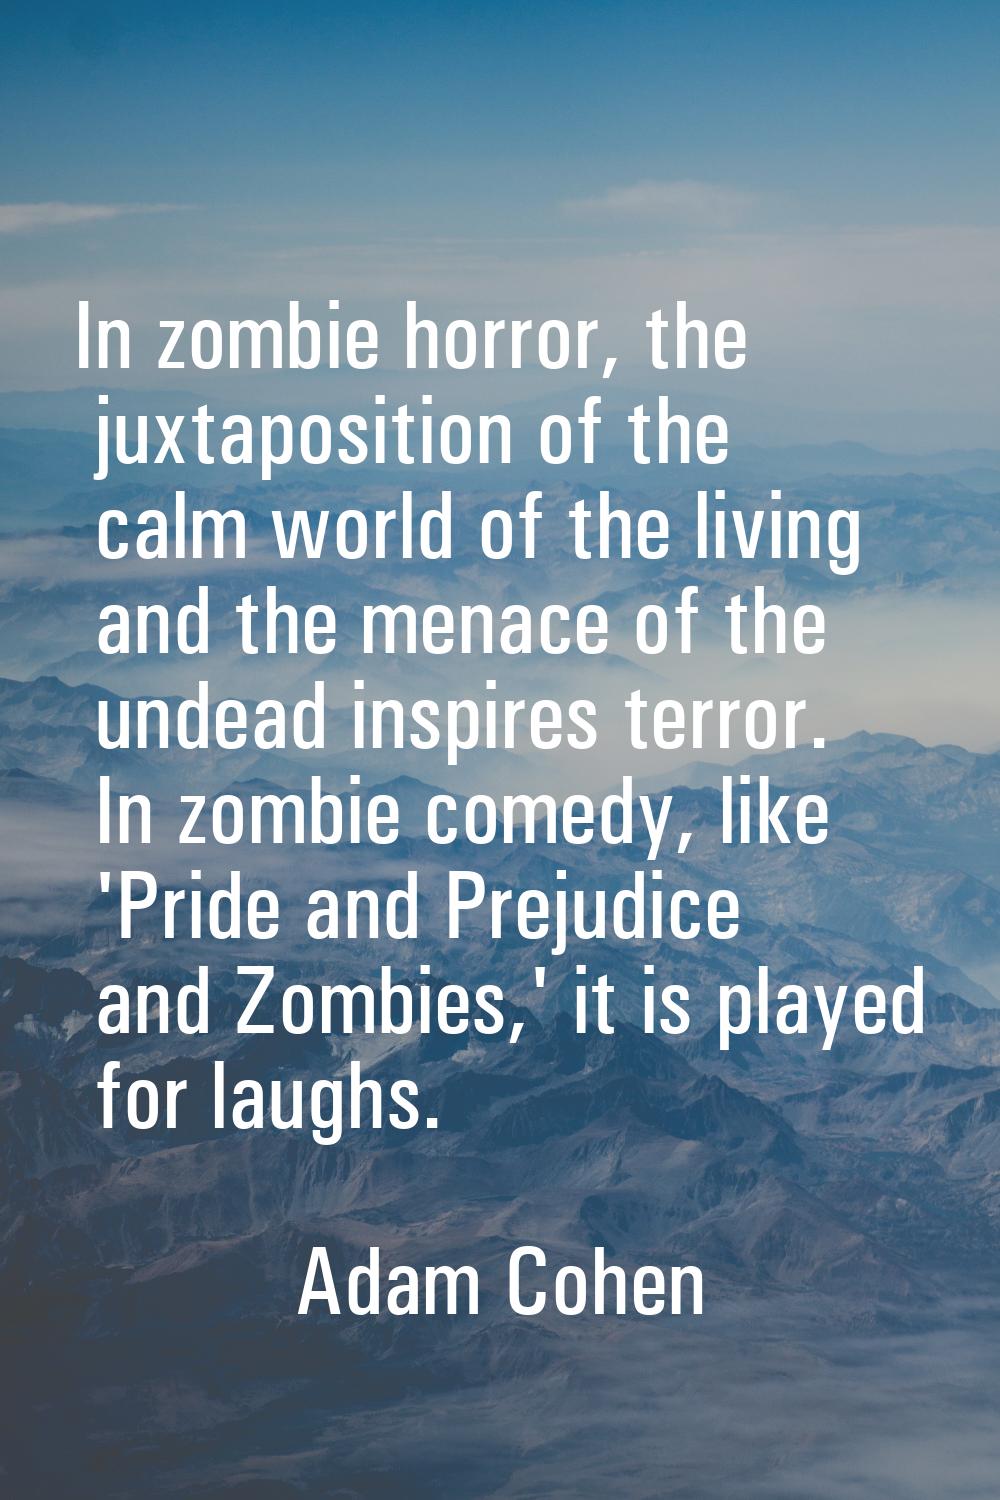 In zombie horror, the juxtaposition of the calm world of the living and the menace of the undead in